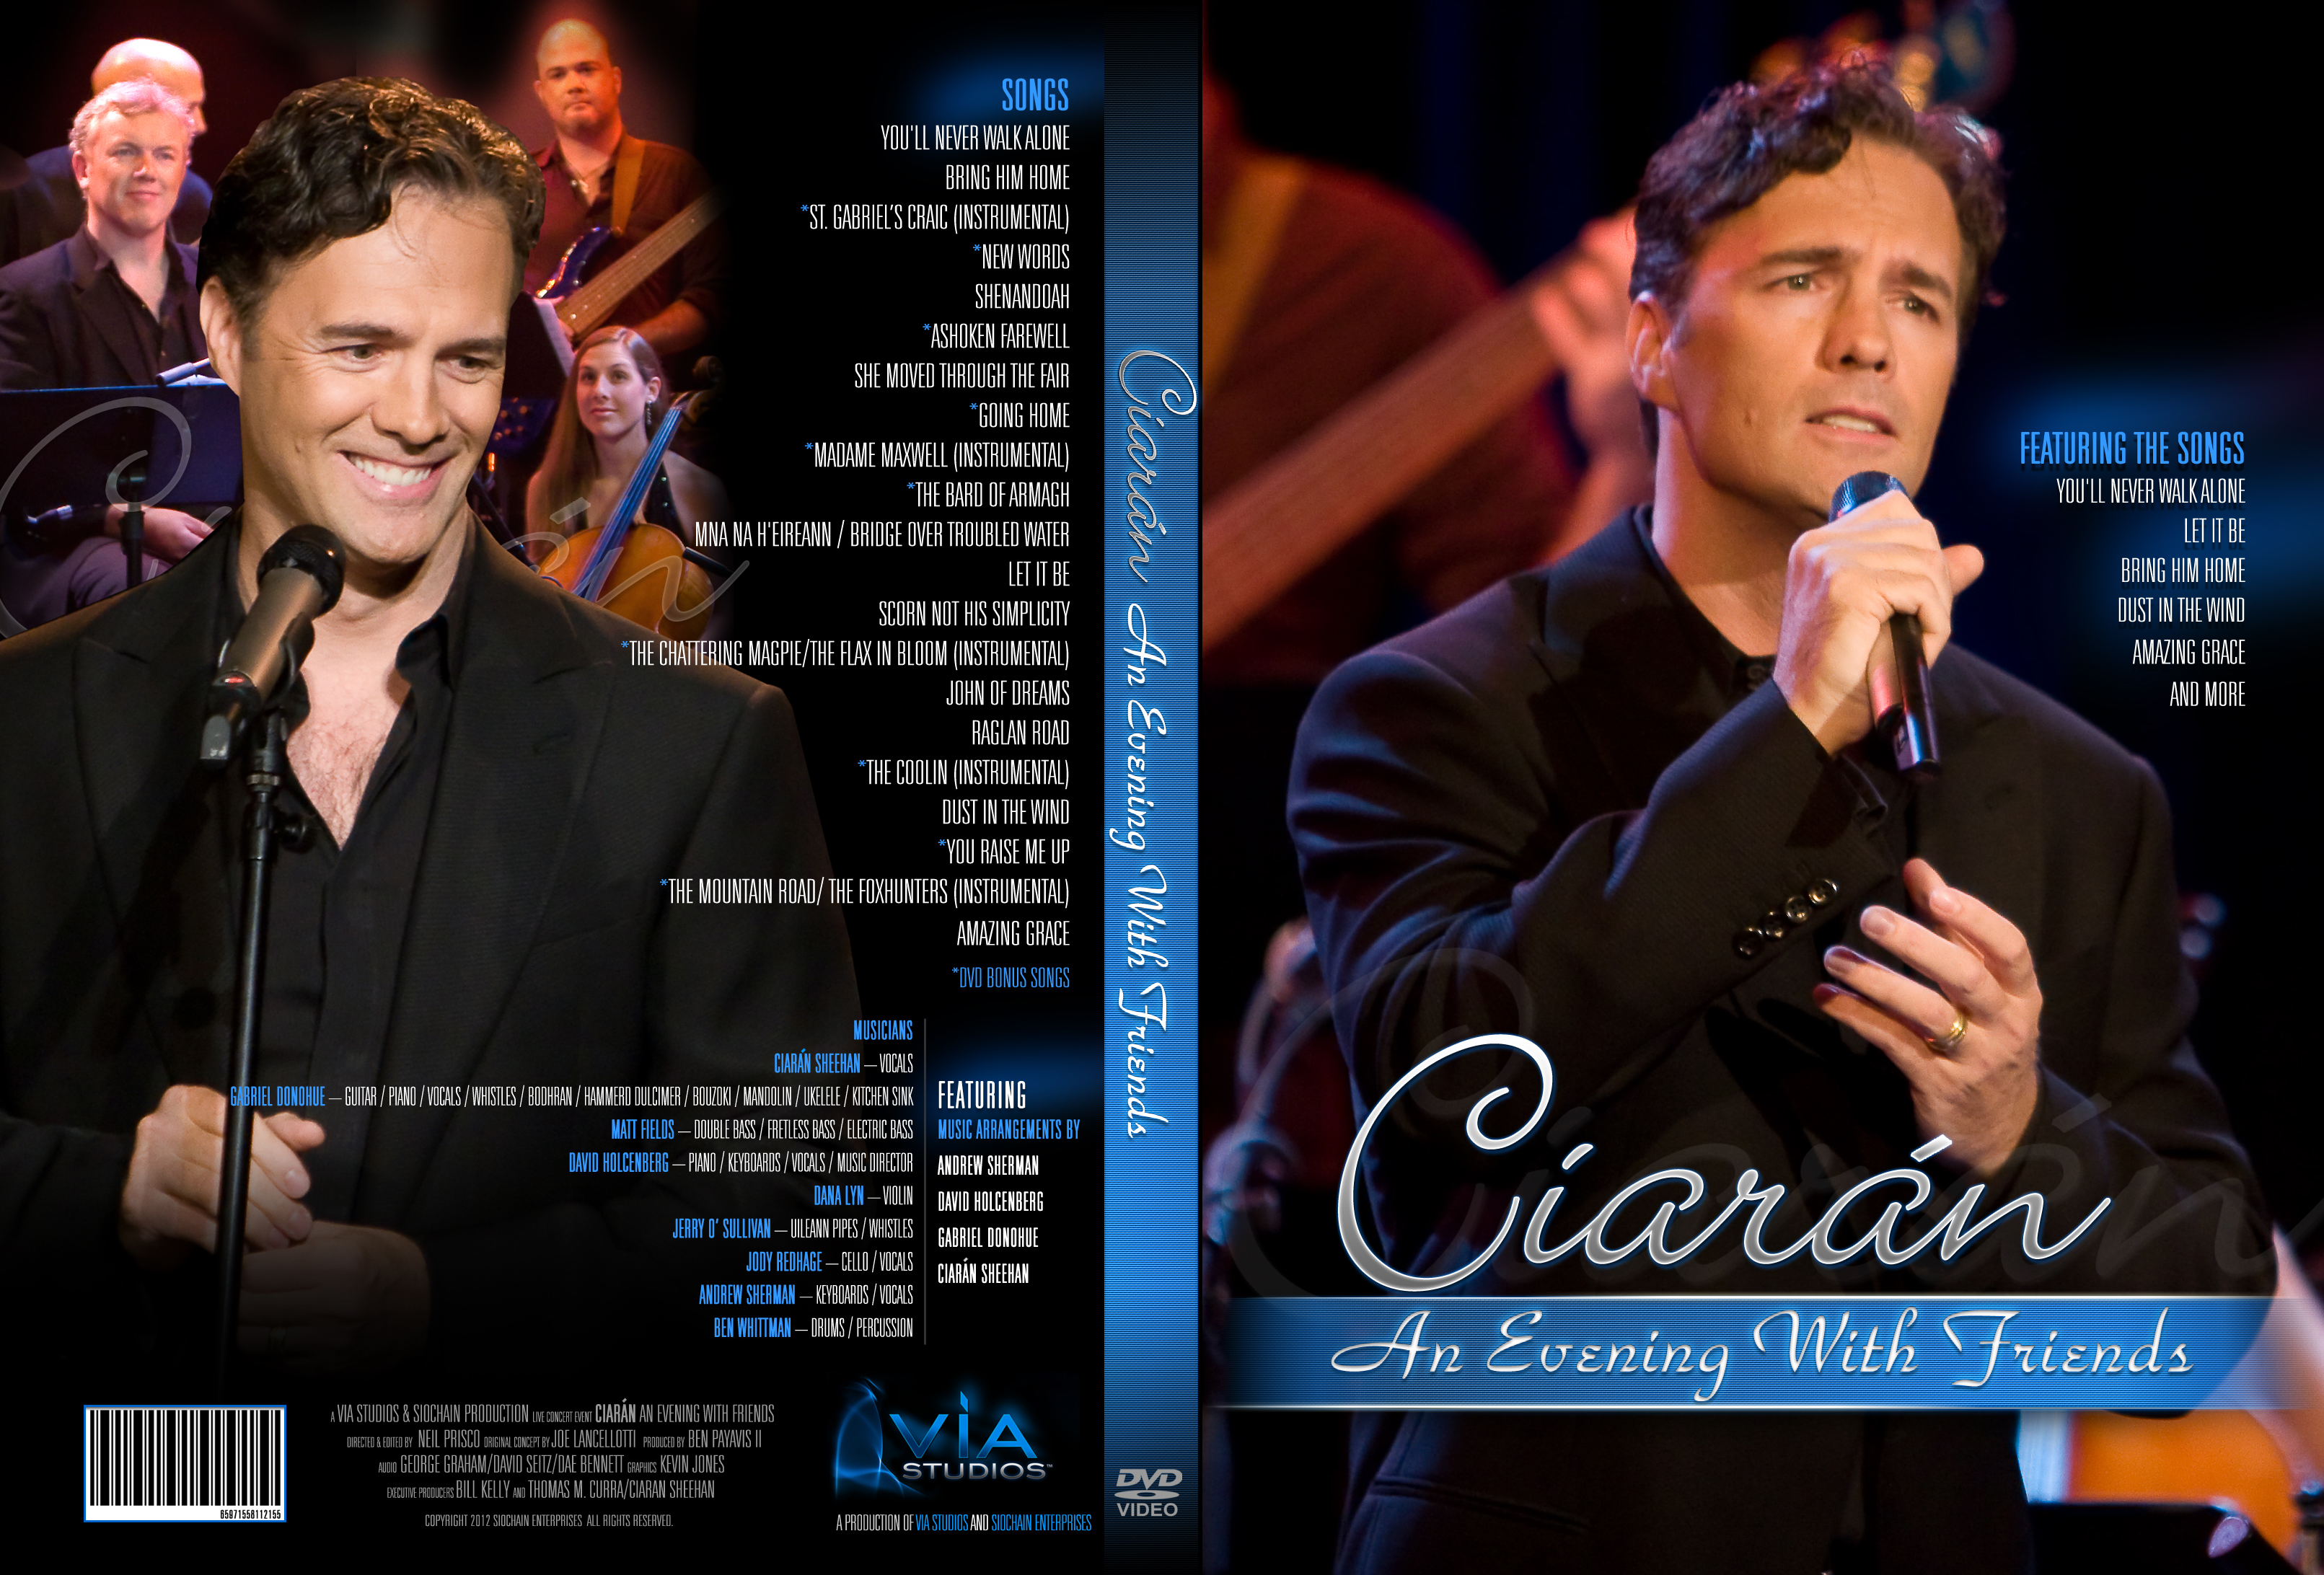 DVD COVER2